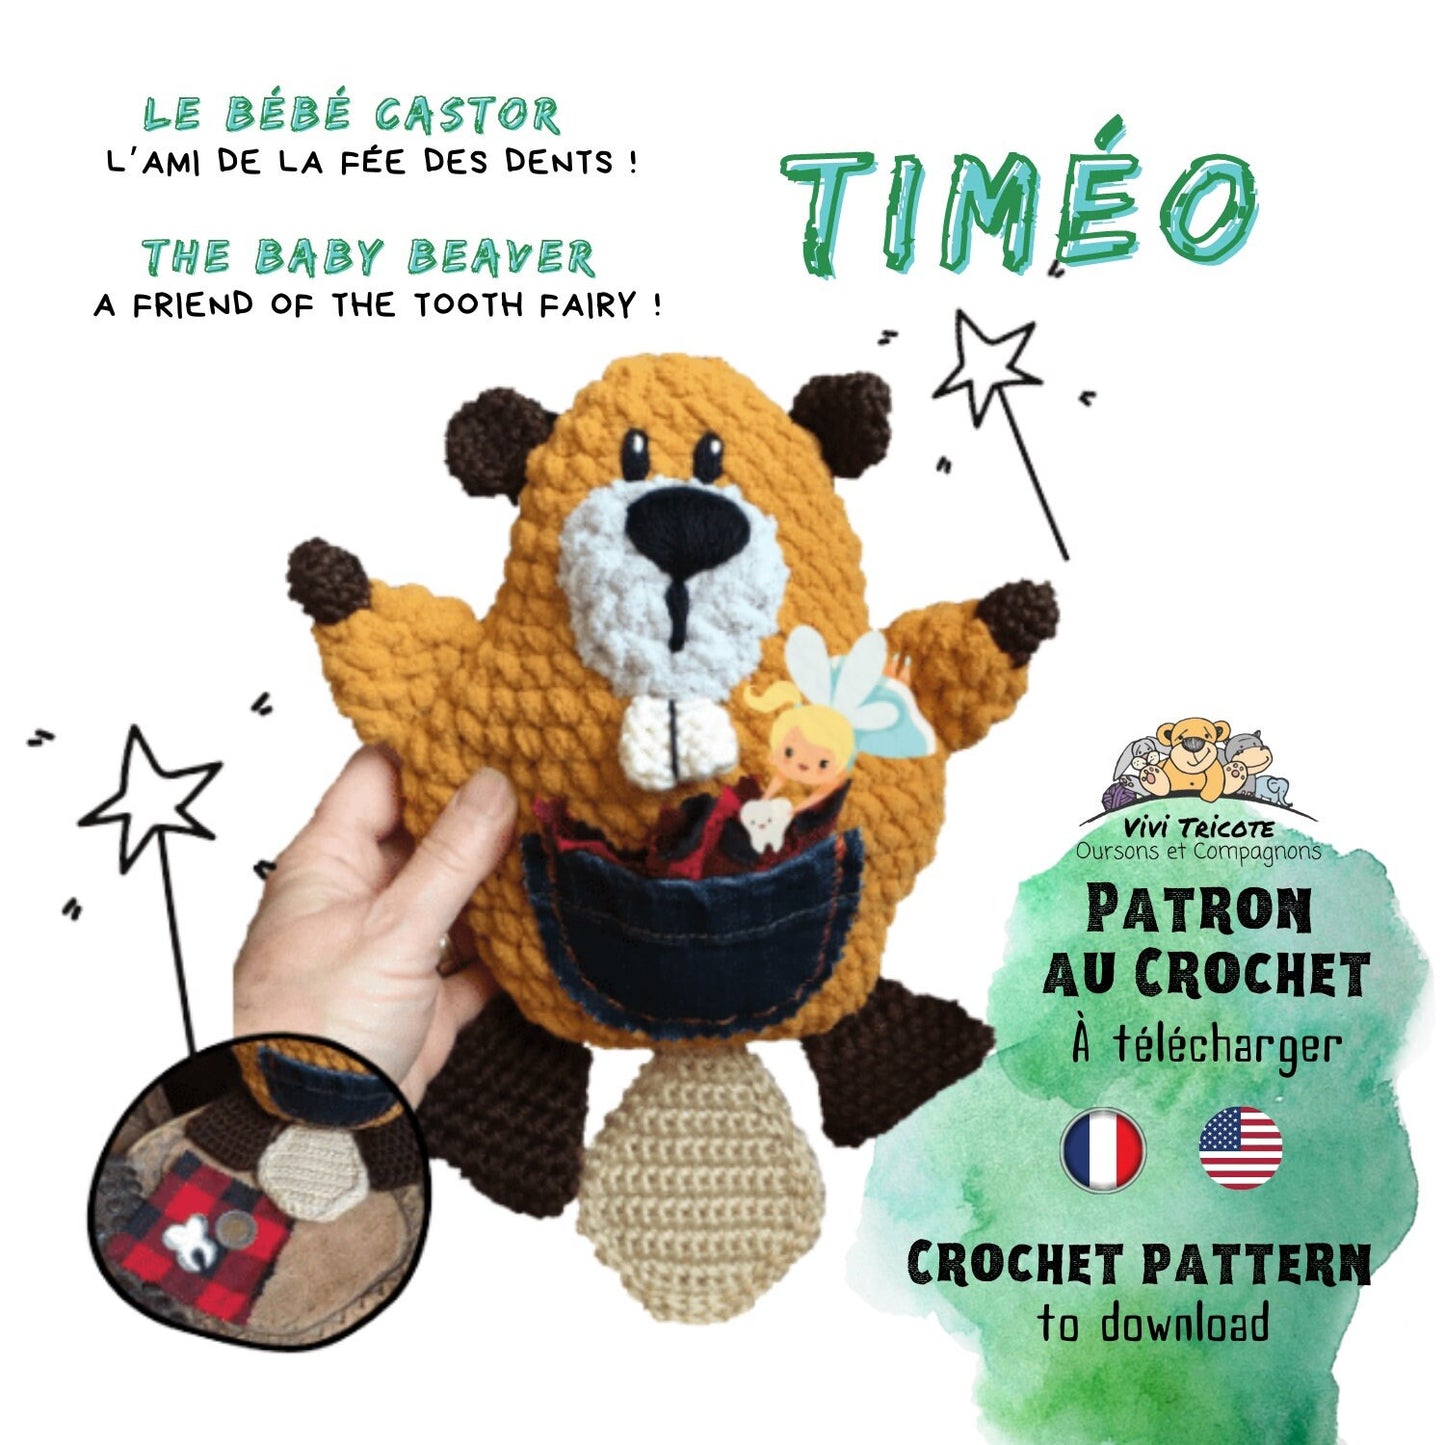 Timéo Le Bébé Castor, crochet pattern to download, French and English PDF